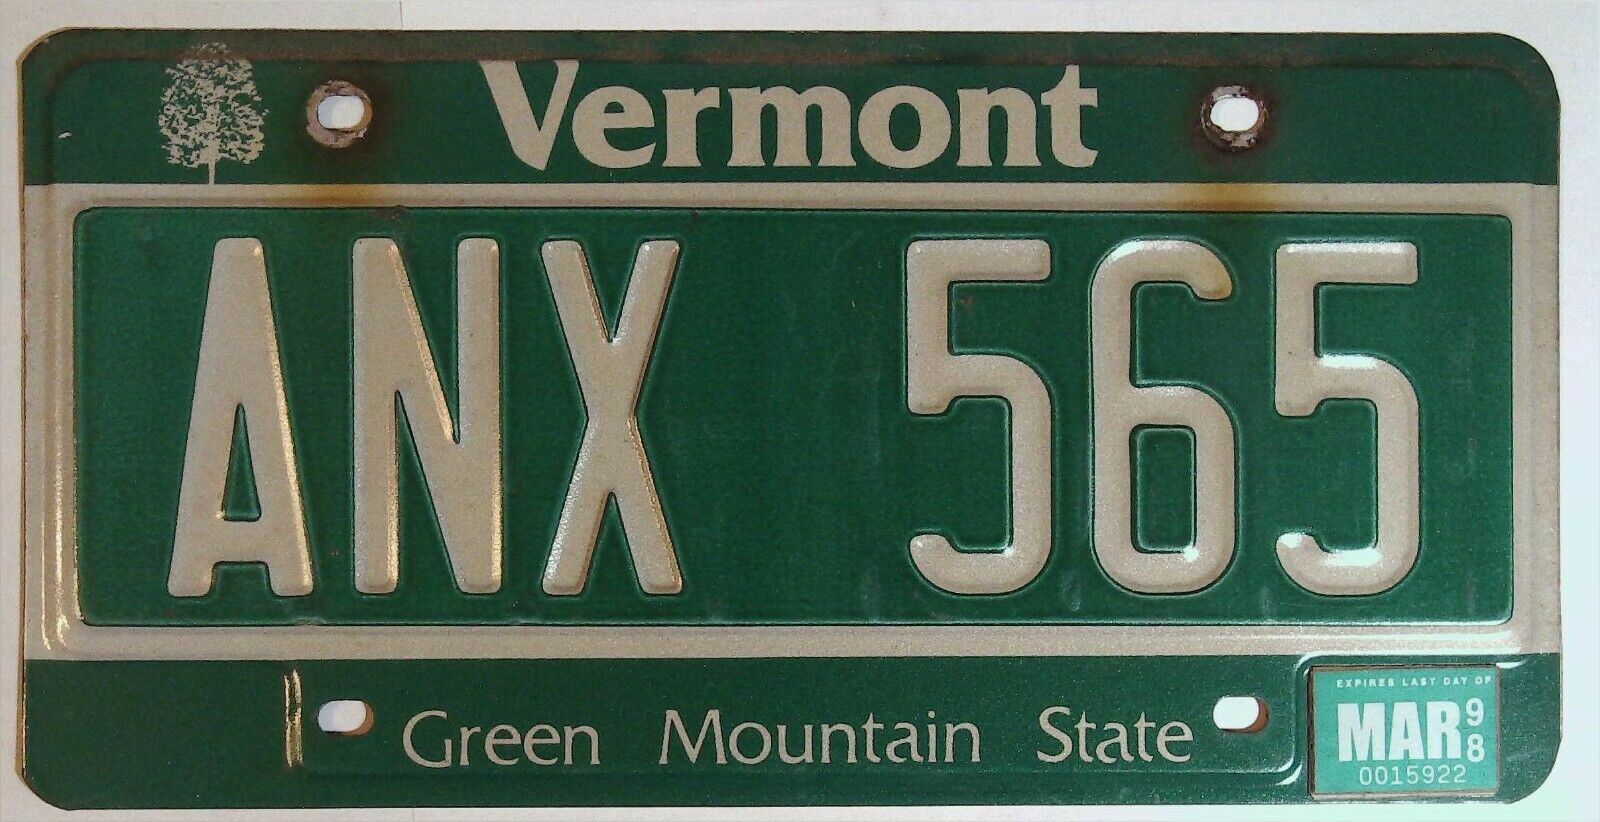 Vermont Vt License Plate Tag 1998 # Anx 565 Green Mountain State B